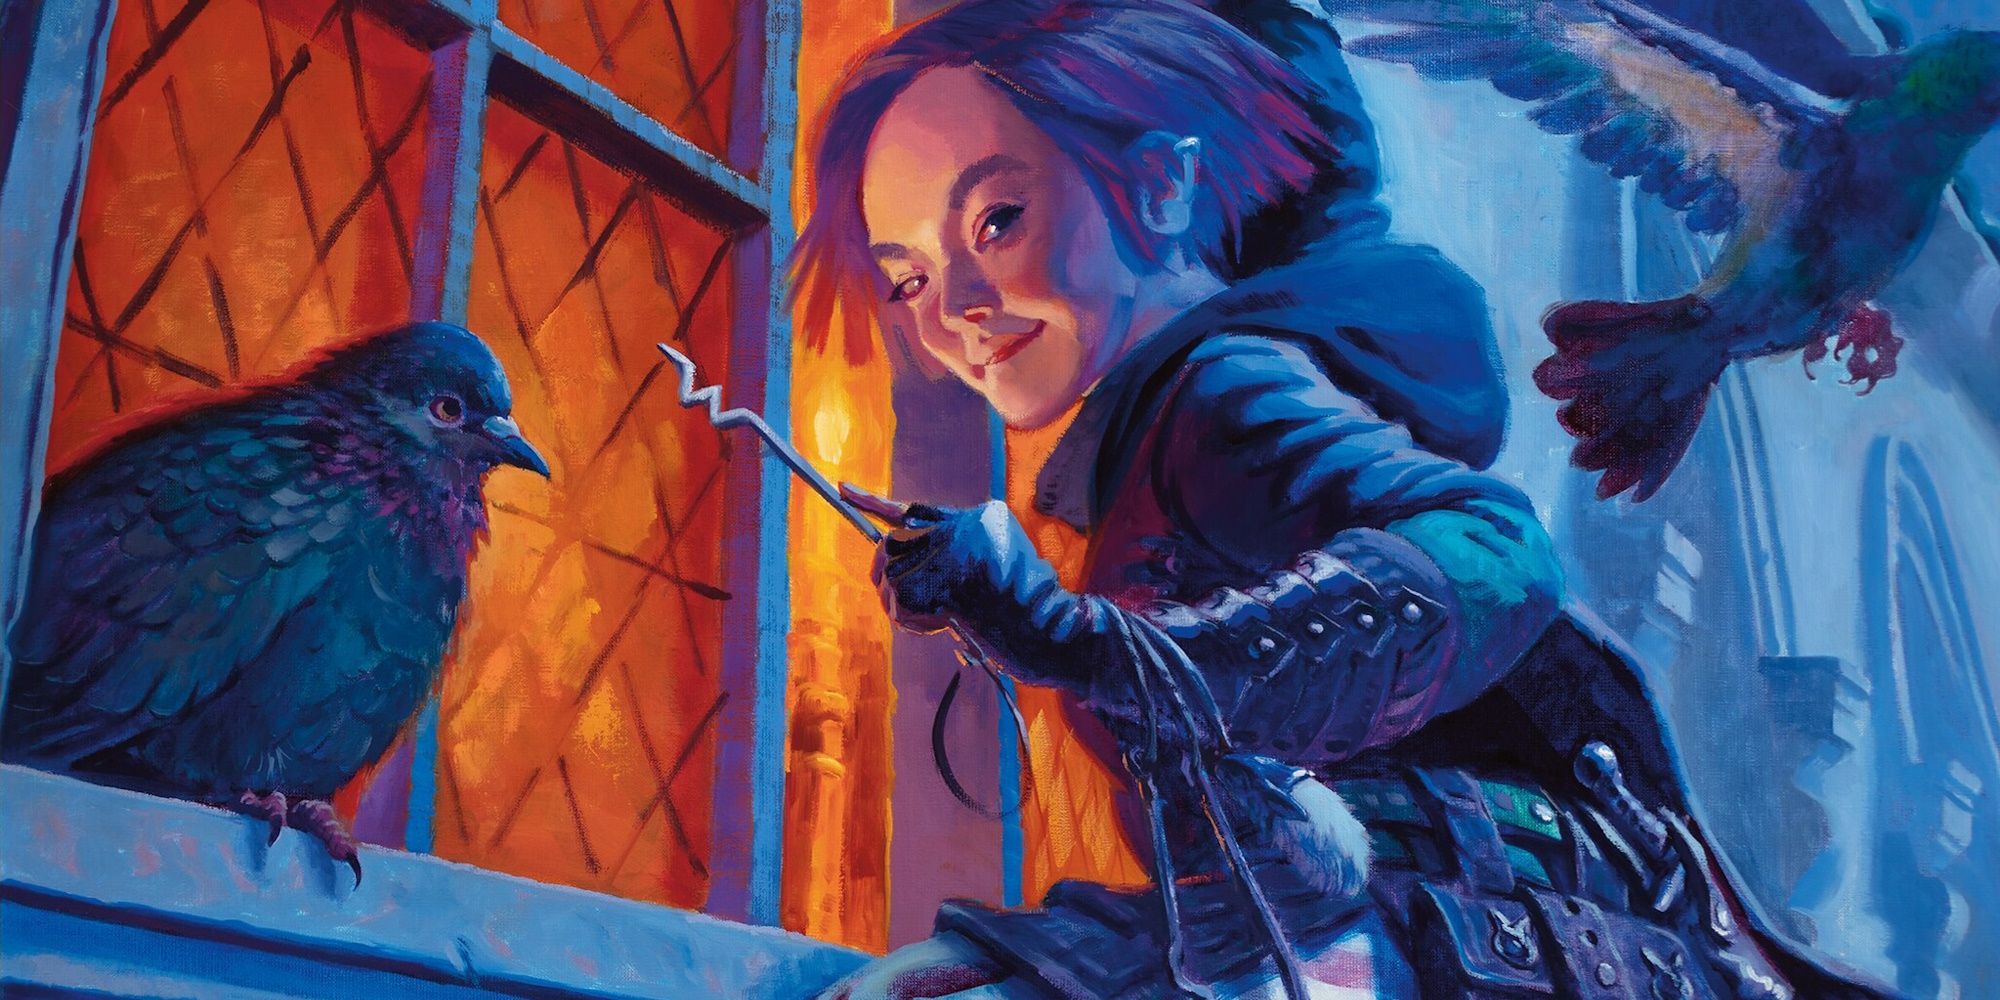 Alora, Merry Thief by Aaron Miller